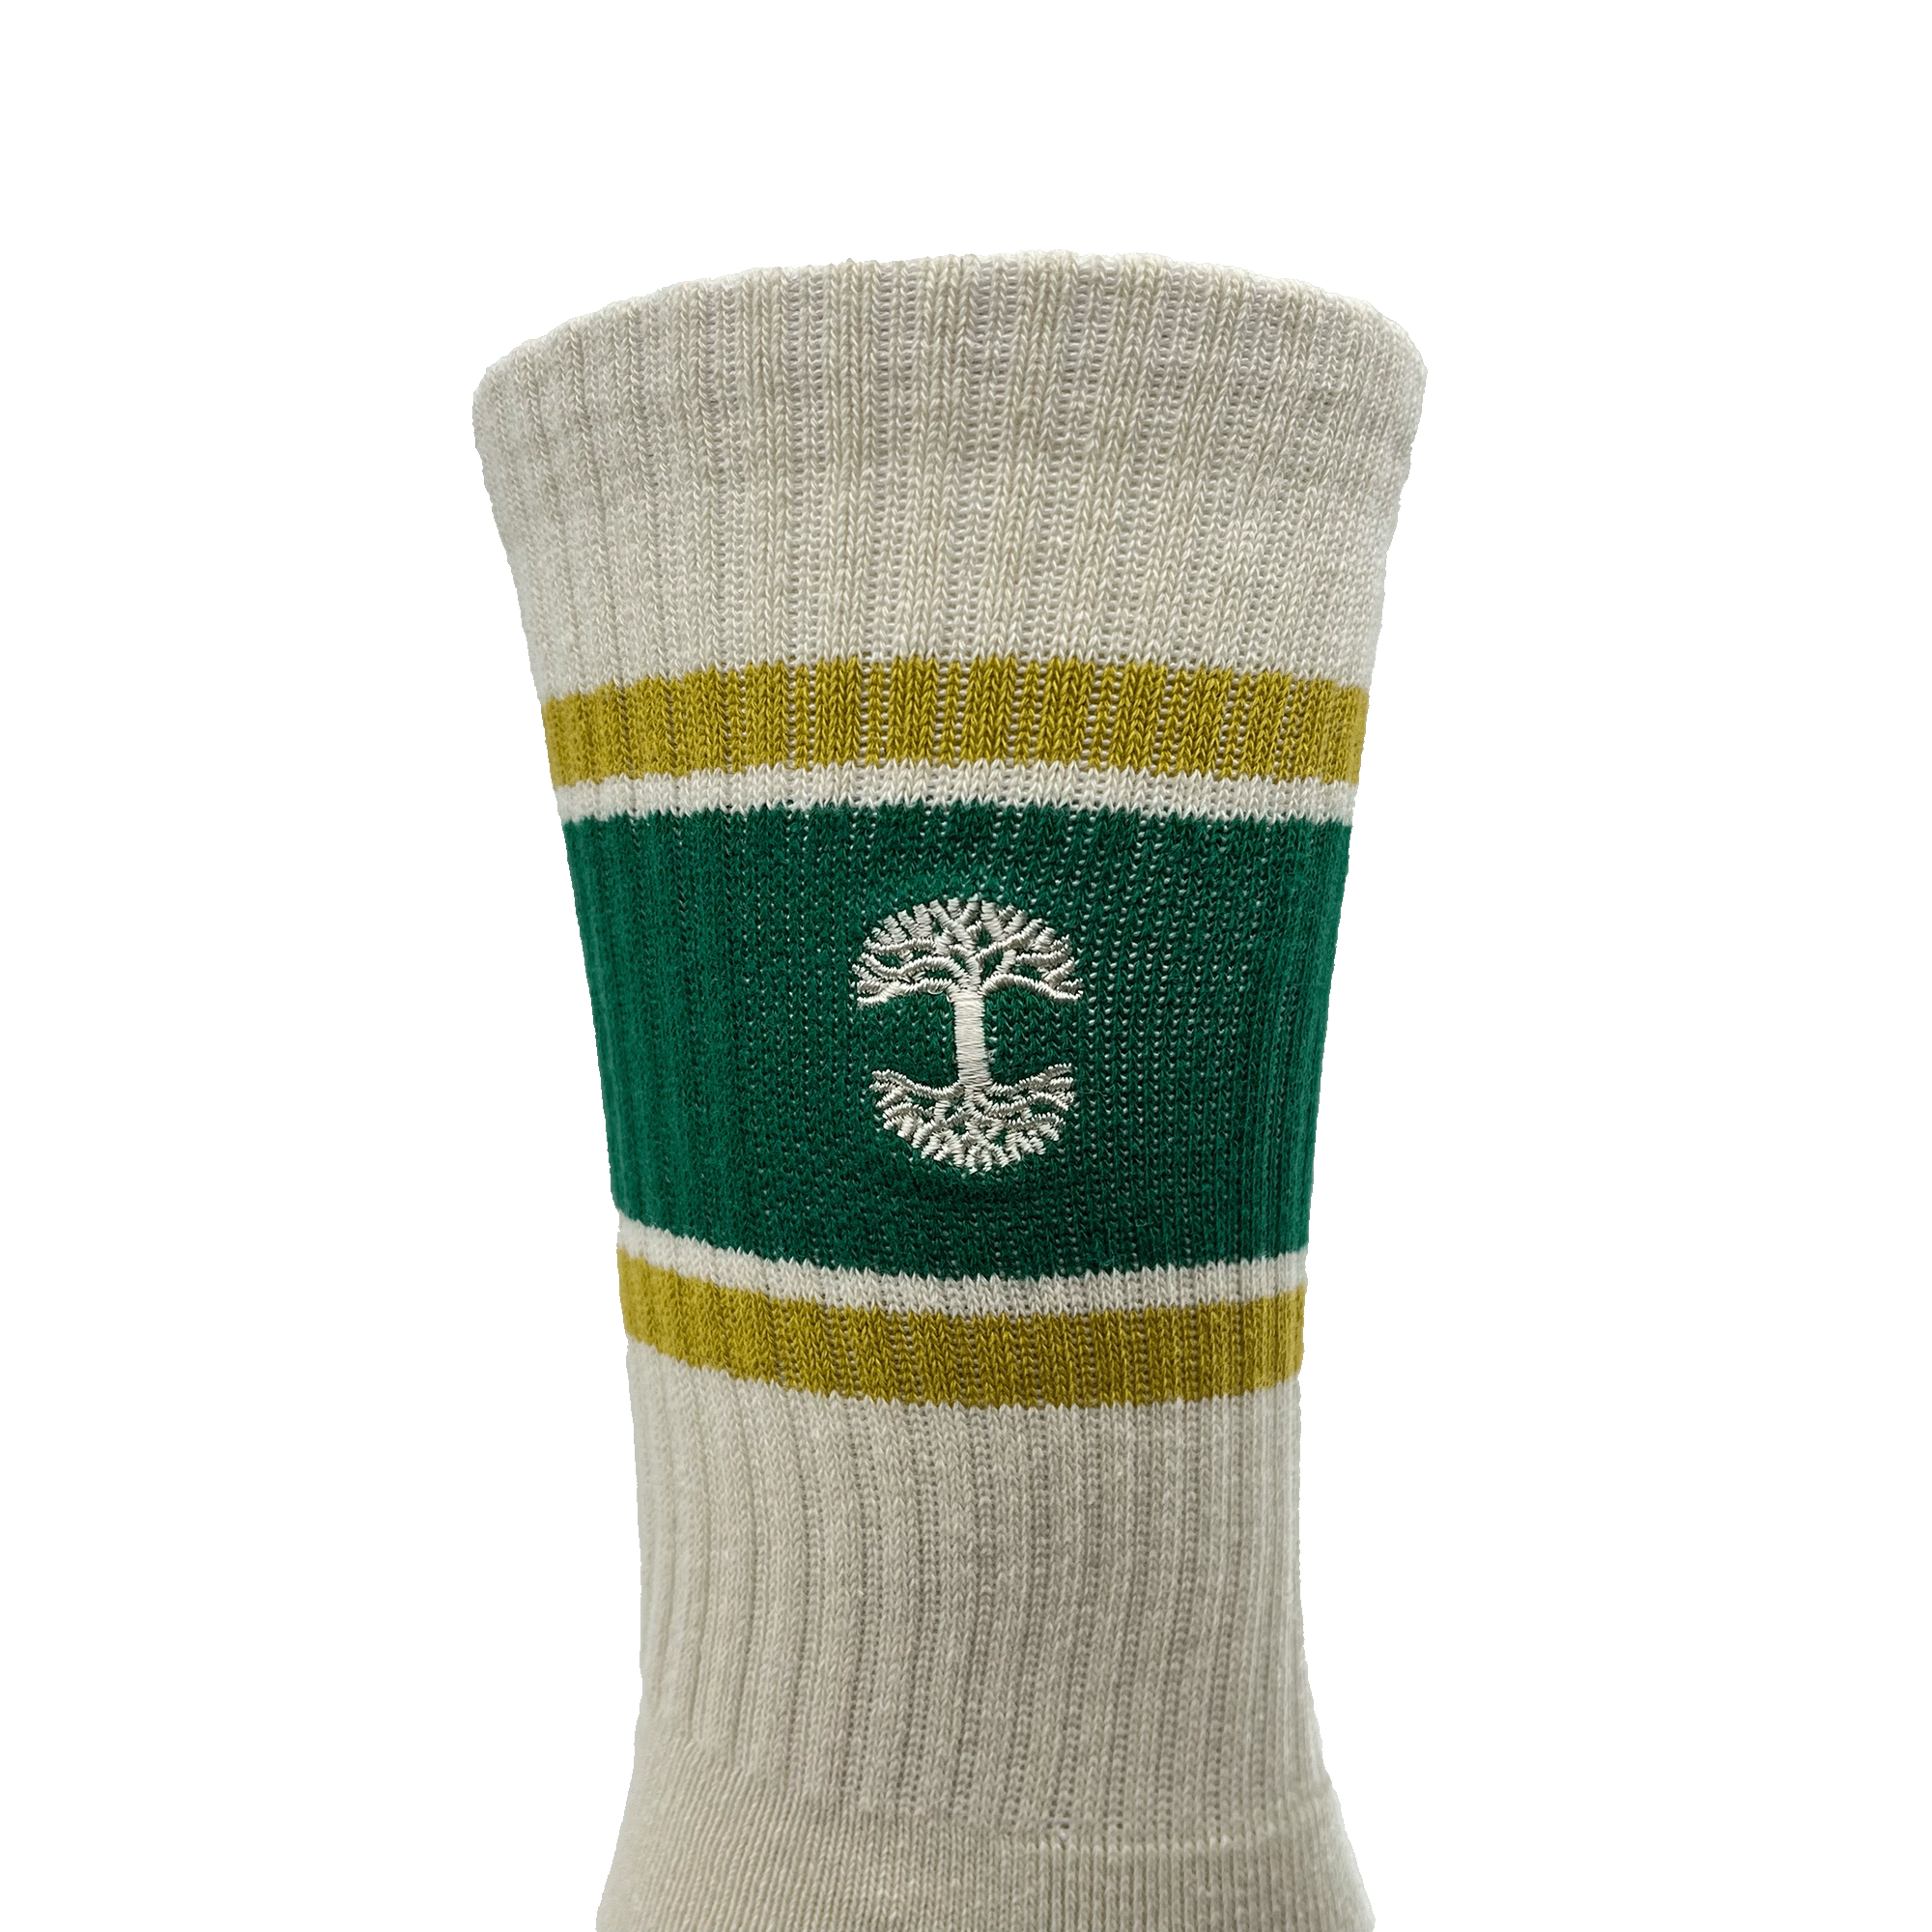 Close-up of embroidered small white Oaklandish tree logo on the side of an off-white crew sock with green and gold stripes on the calf.